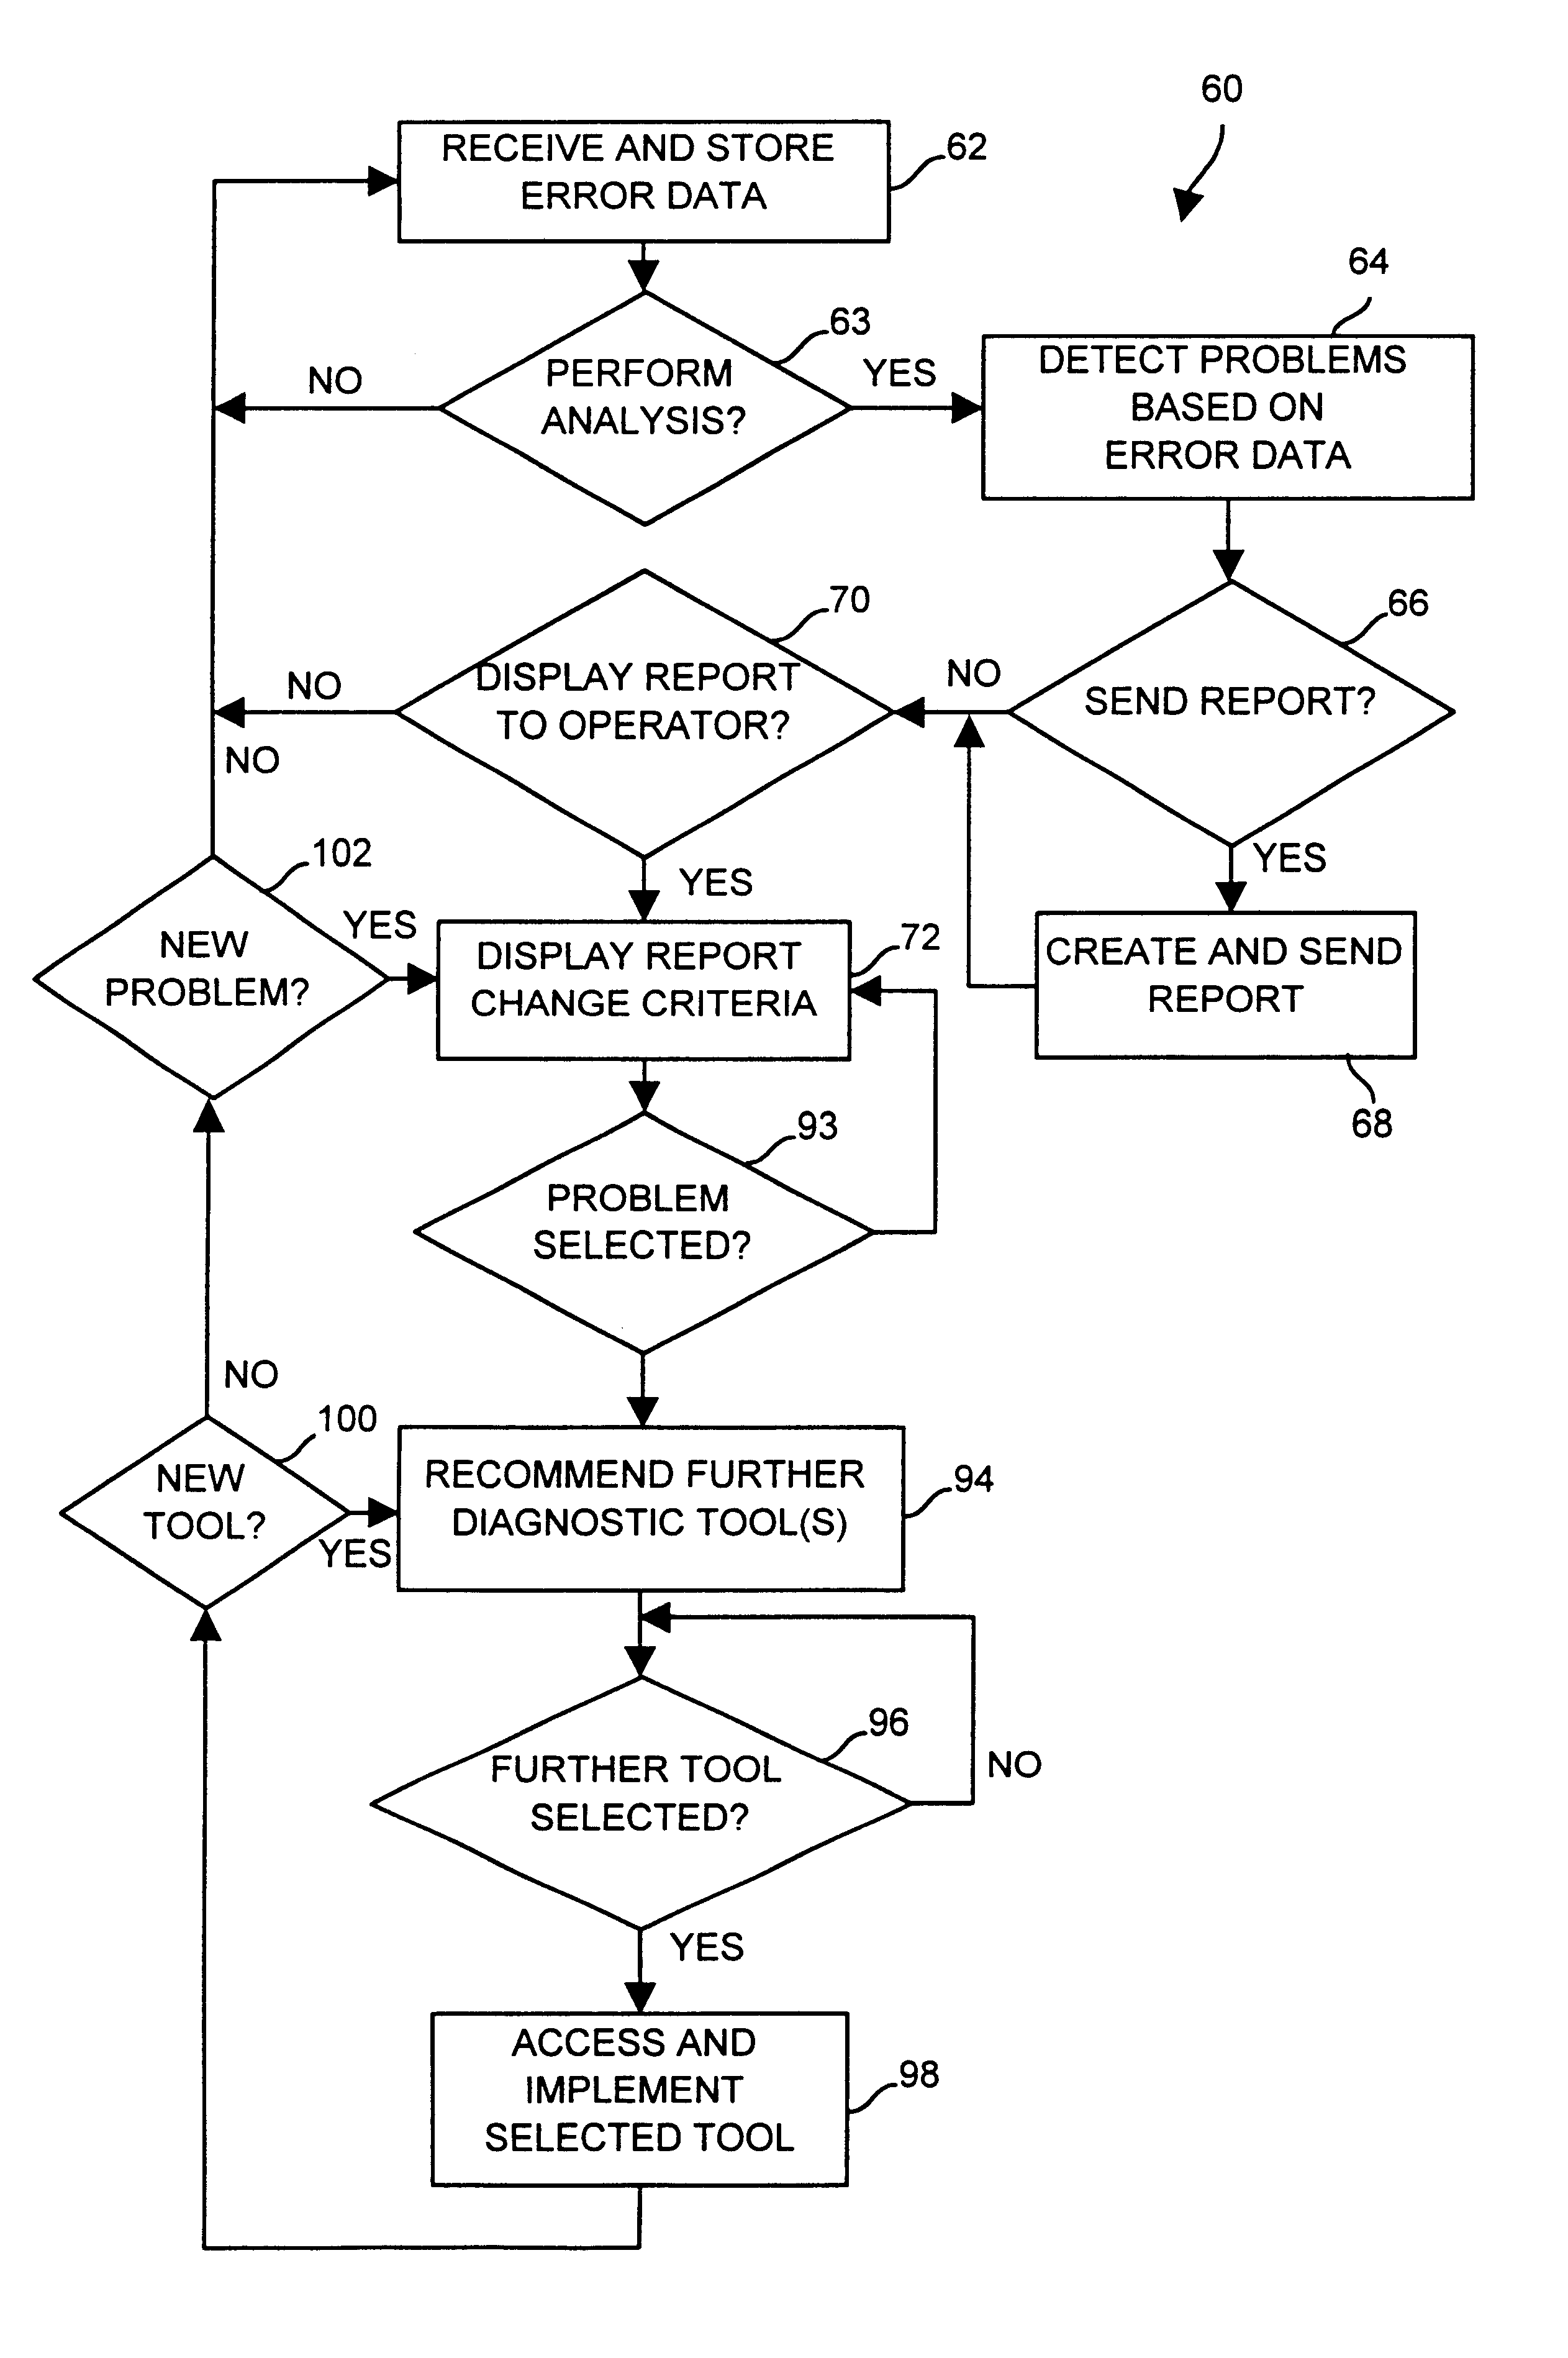 Diagnostics in a process control system which uses multi-variable control techniques